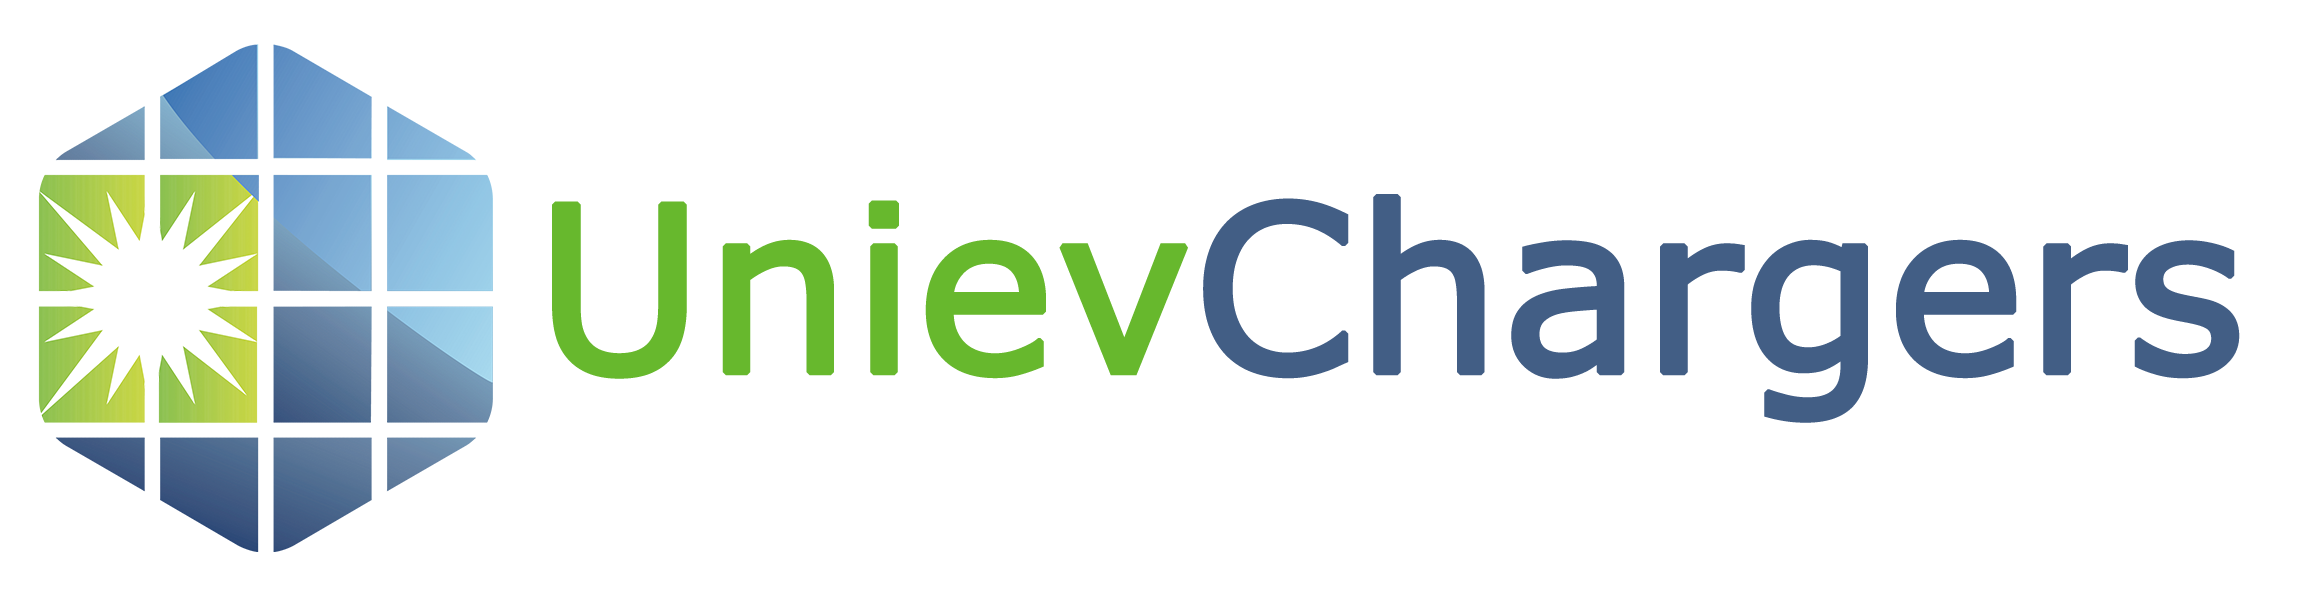 Unievchargers